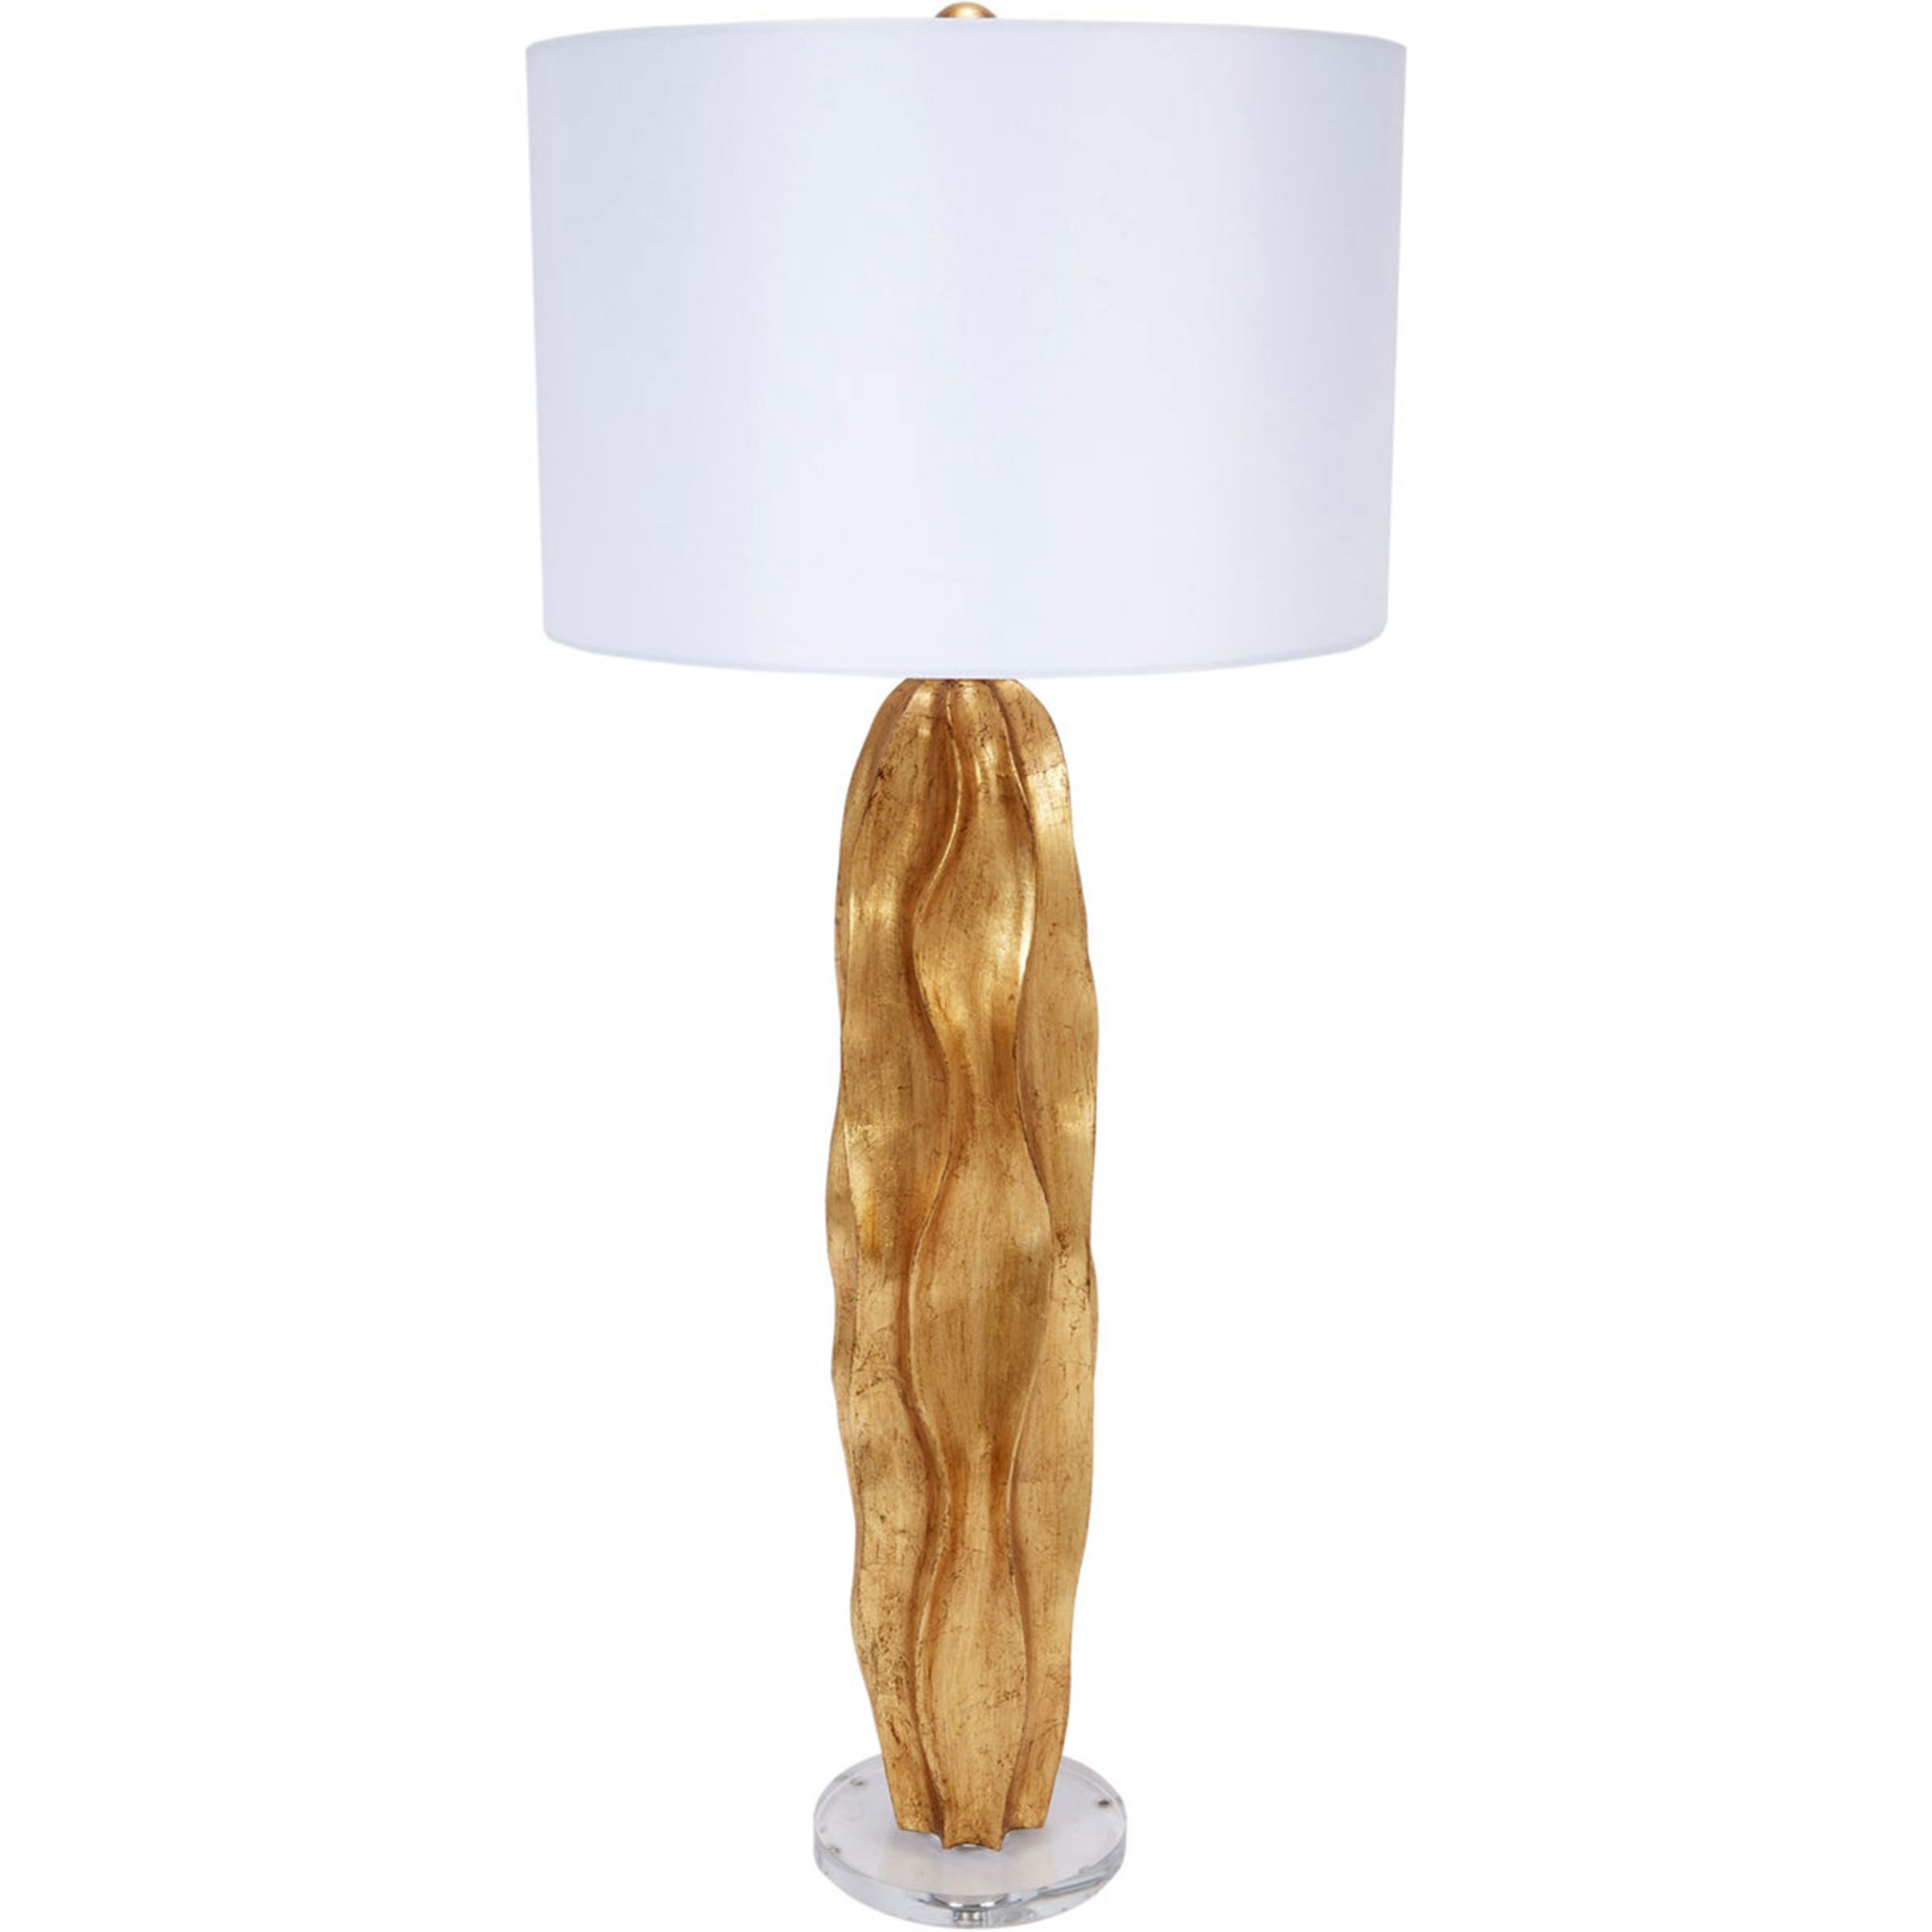 GOLD LEAF STANTON WAVE BUFFET LAMP WITH WHITE LINEN SHADE 37H